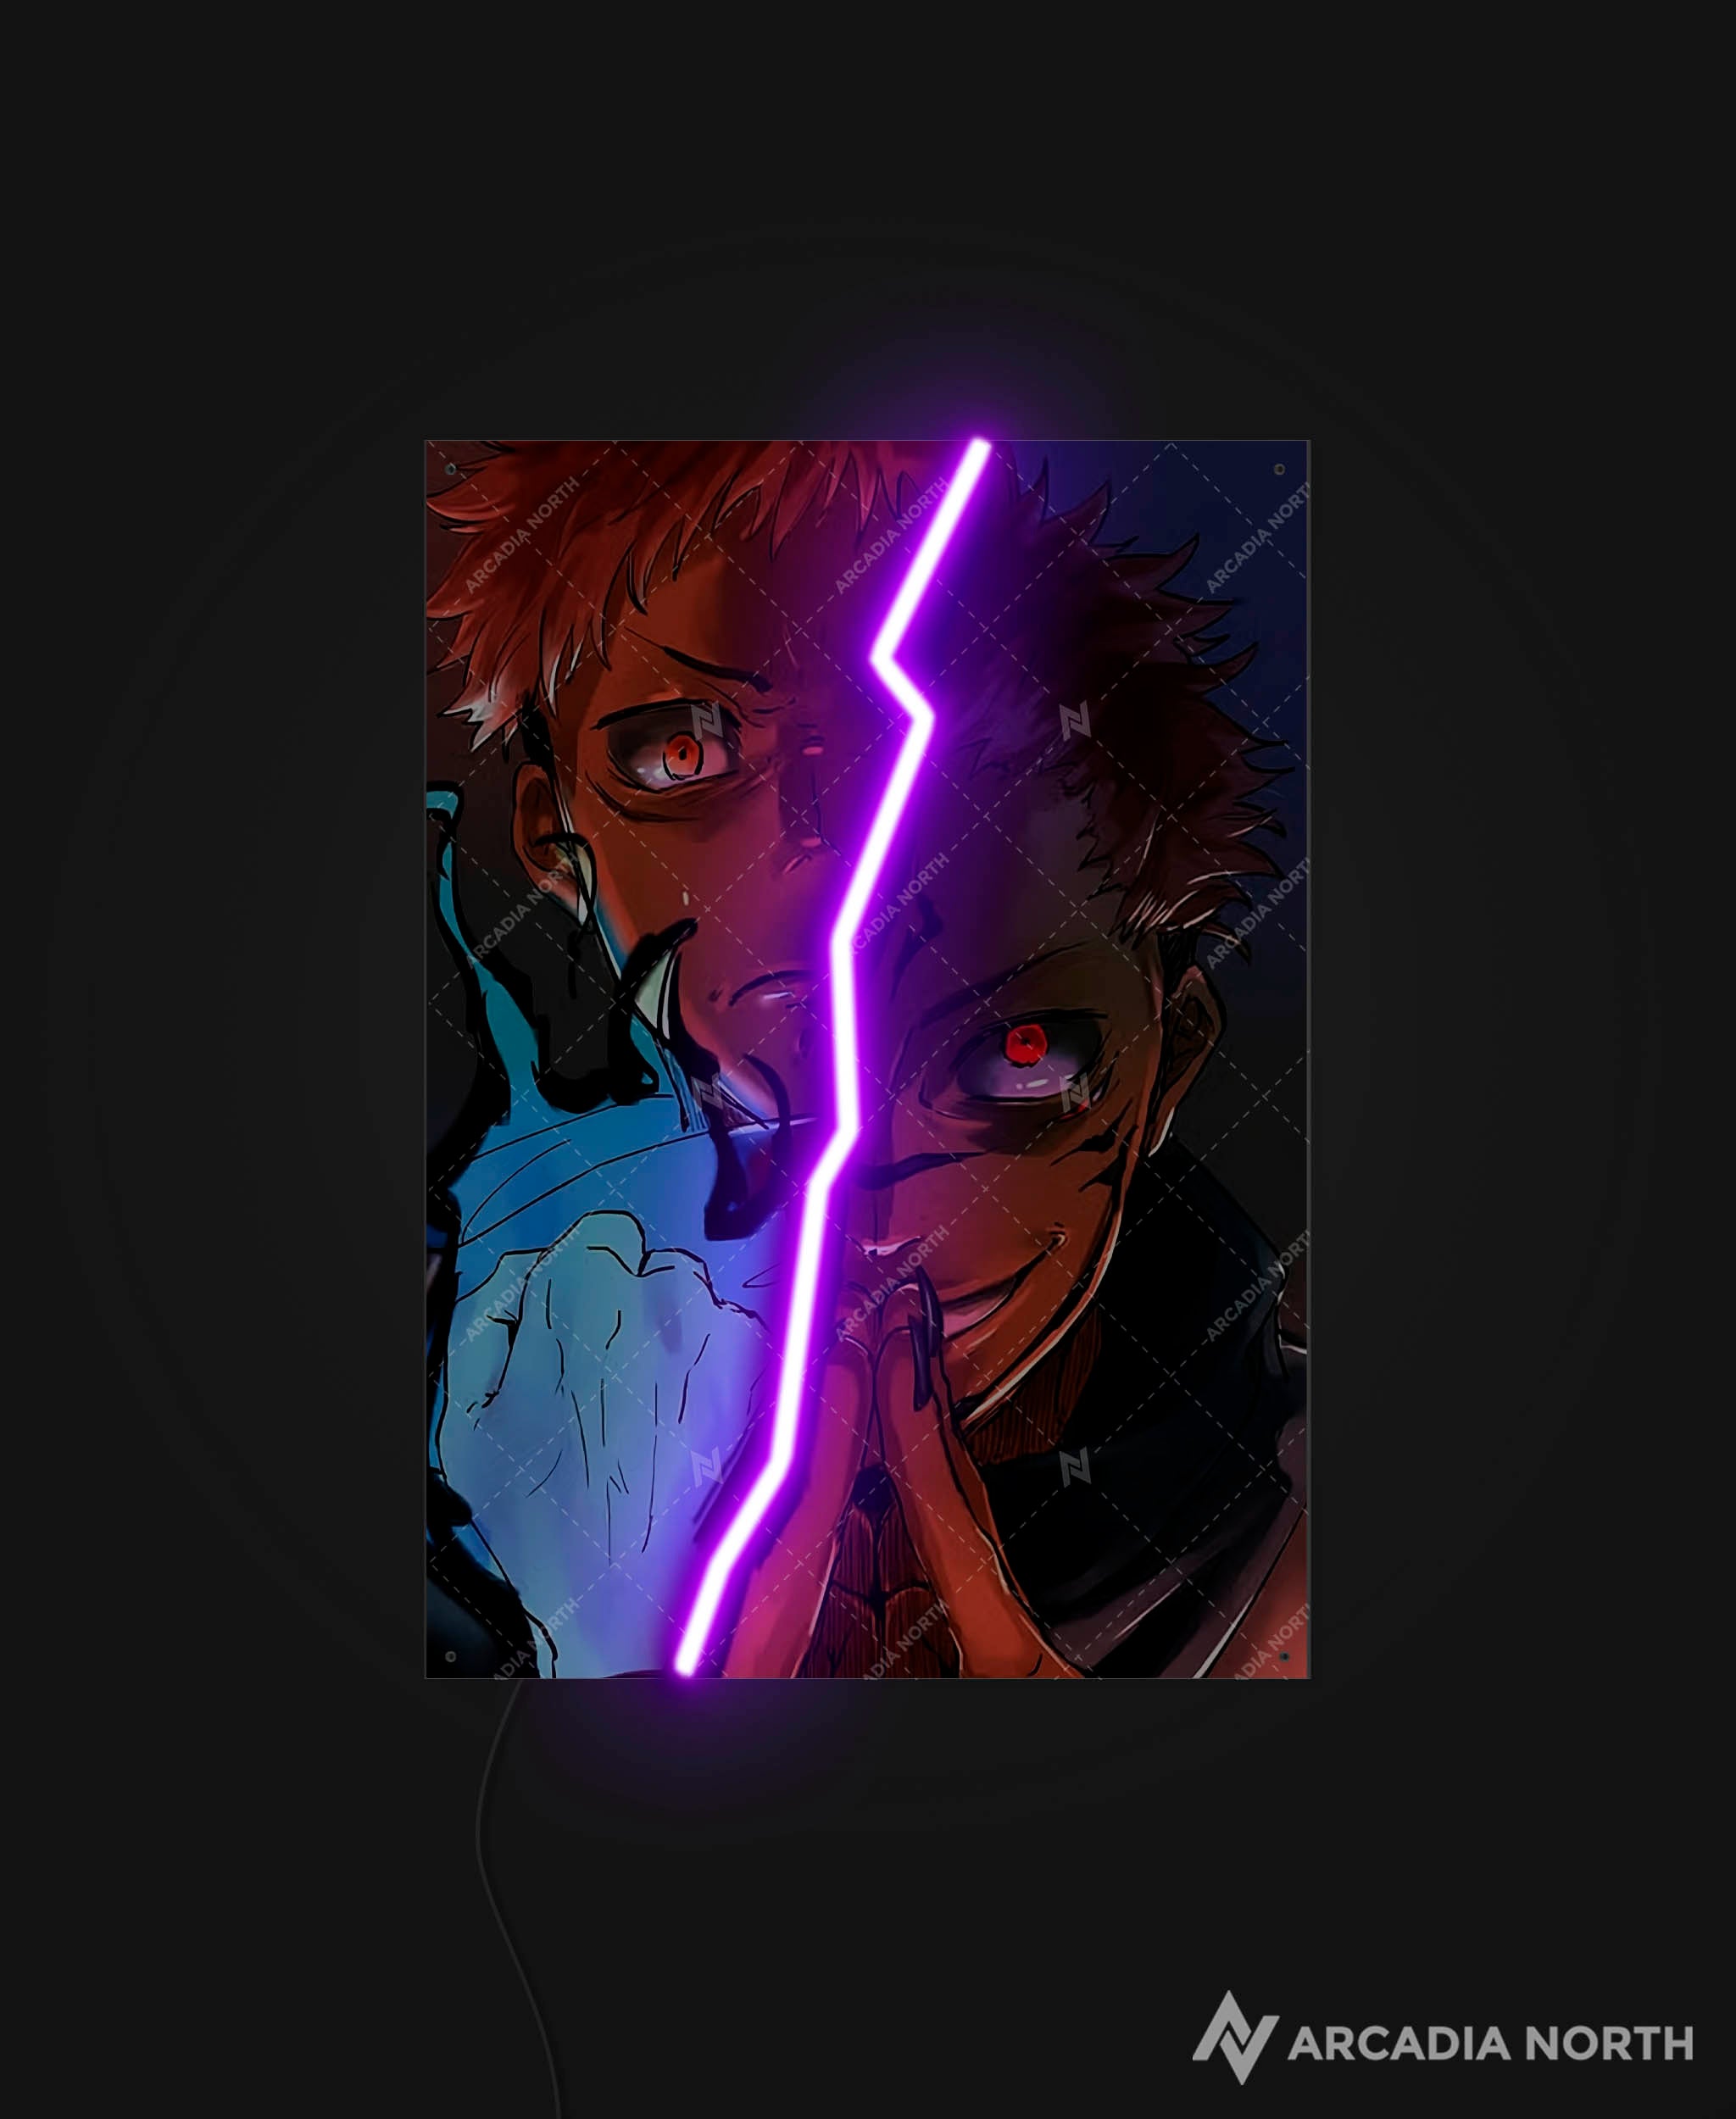 Arcadia North AURALIGHT - an LED Poster featuring the anime Jujutsu Kaisen with Yuji Itadori and Ryomen Sukuna. The split between the two characters is illuminated by LED neon lights. UV-printed poster on acrylic.